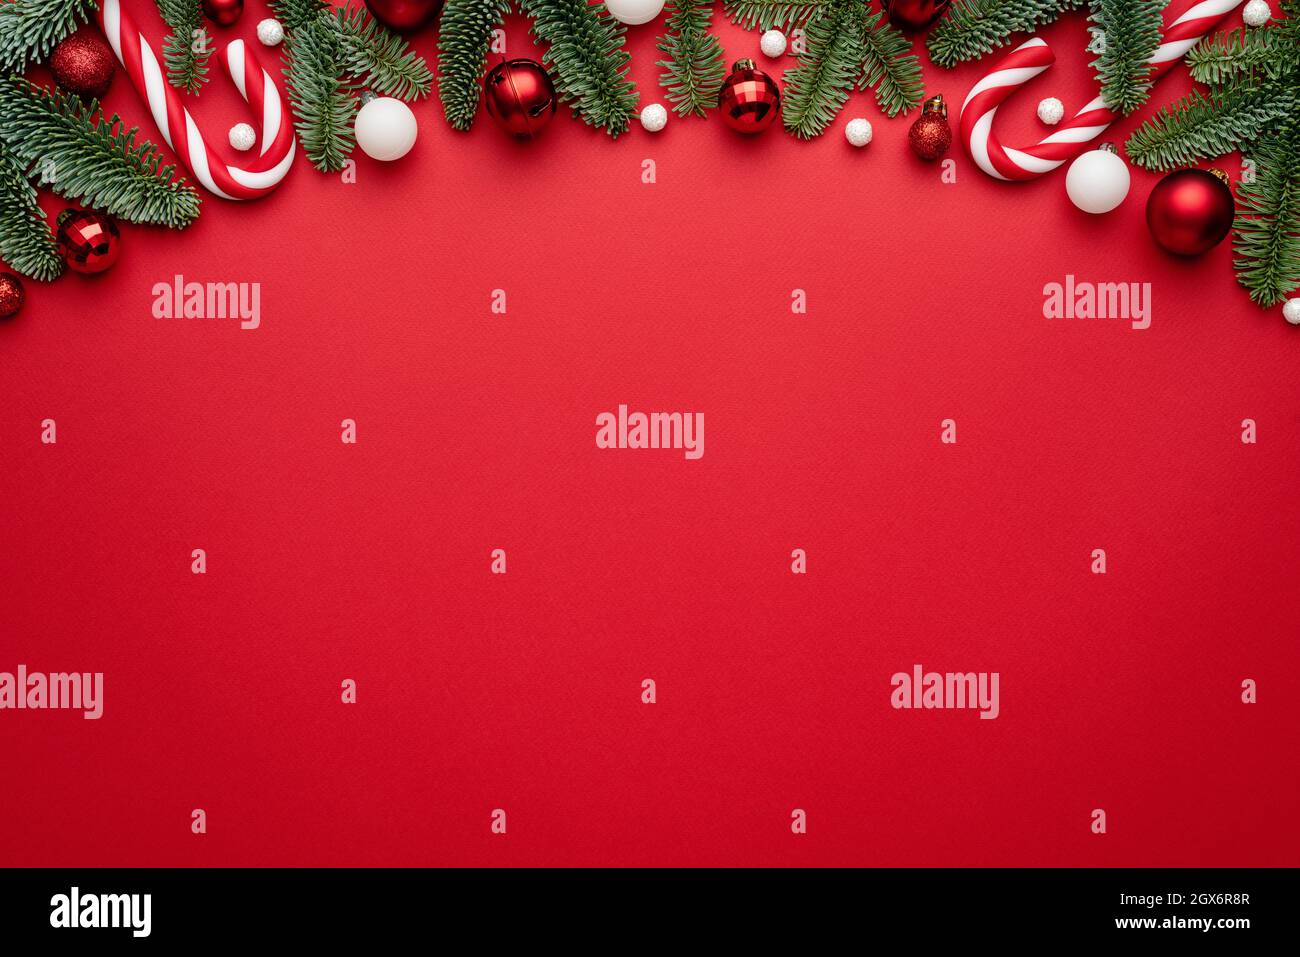 Red background with holiday border for Christmas design. Blank with a copy space for text Stock Photo